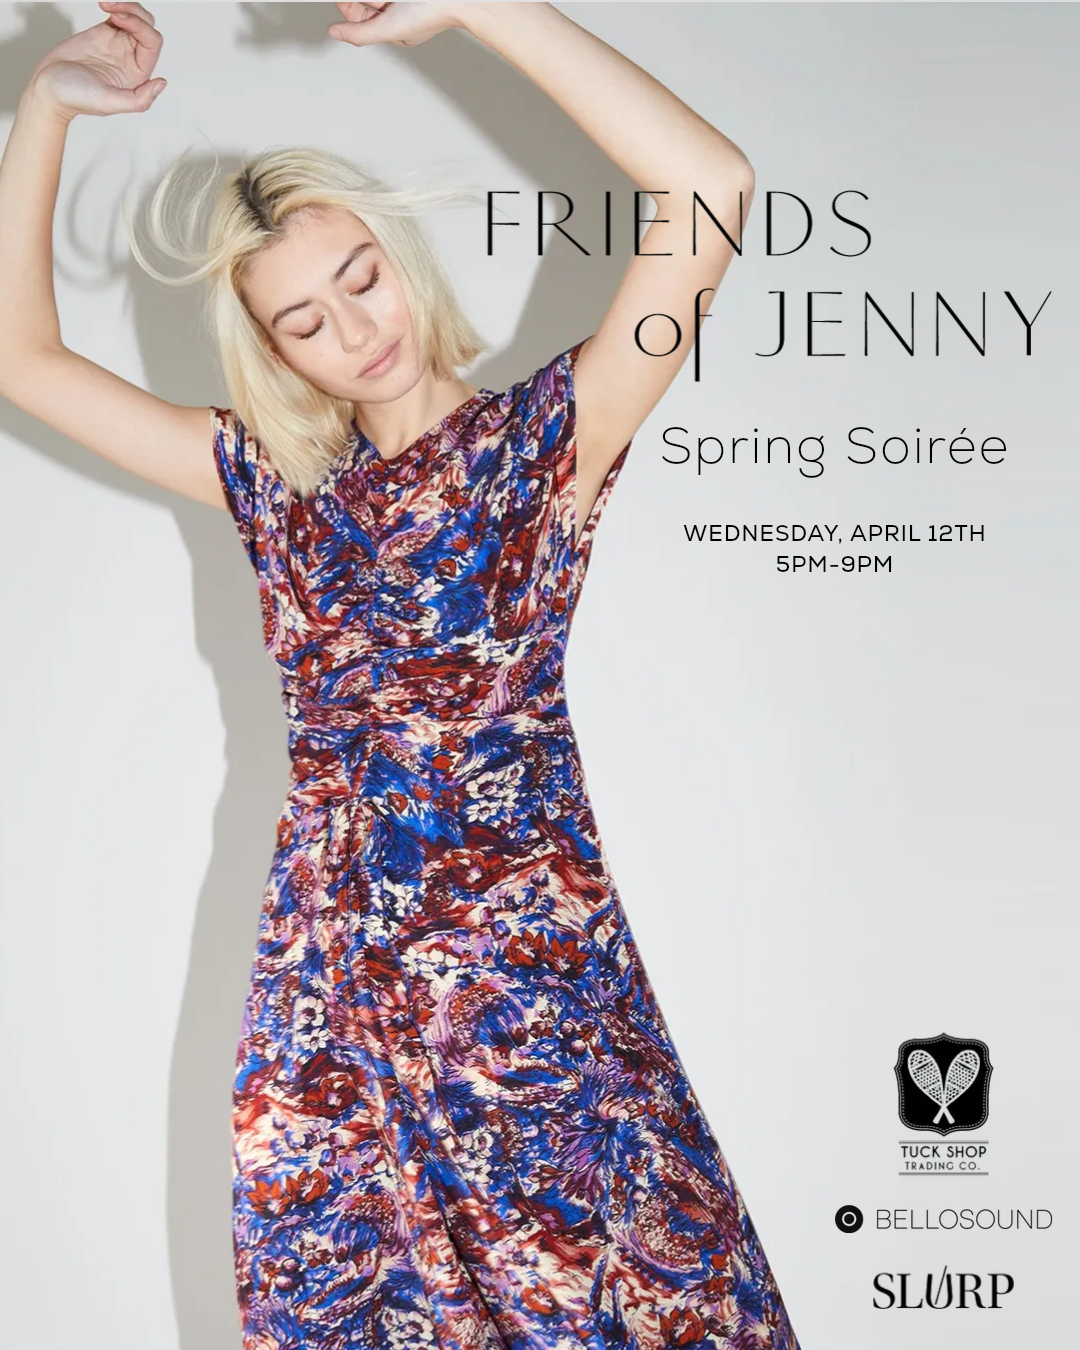 Friends of Jenny Banner: Wednesday, April 12th, 2023